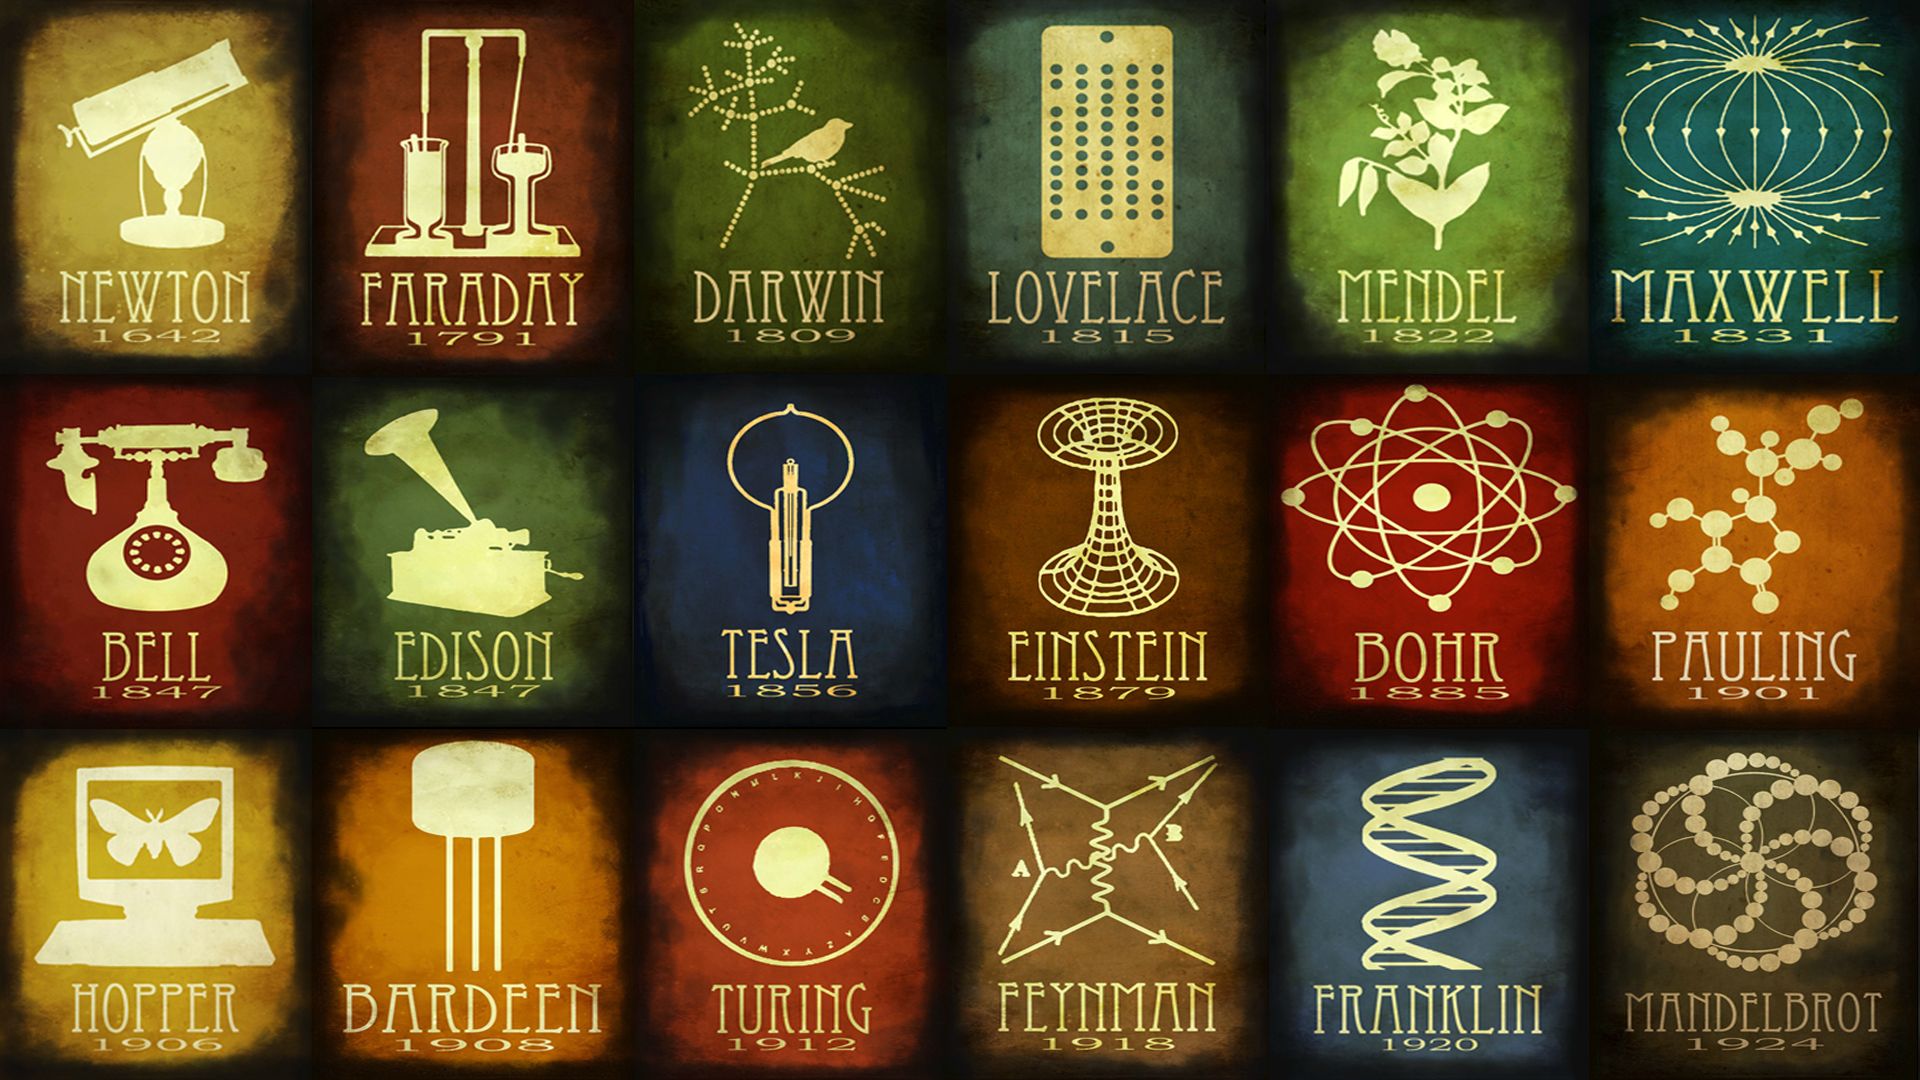 Cool Science Wallpaper Anything Related To